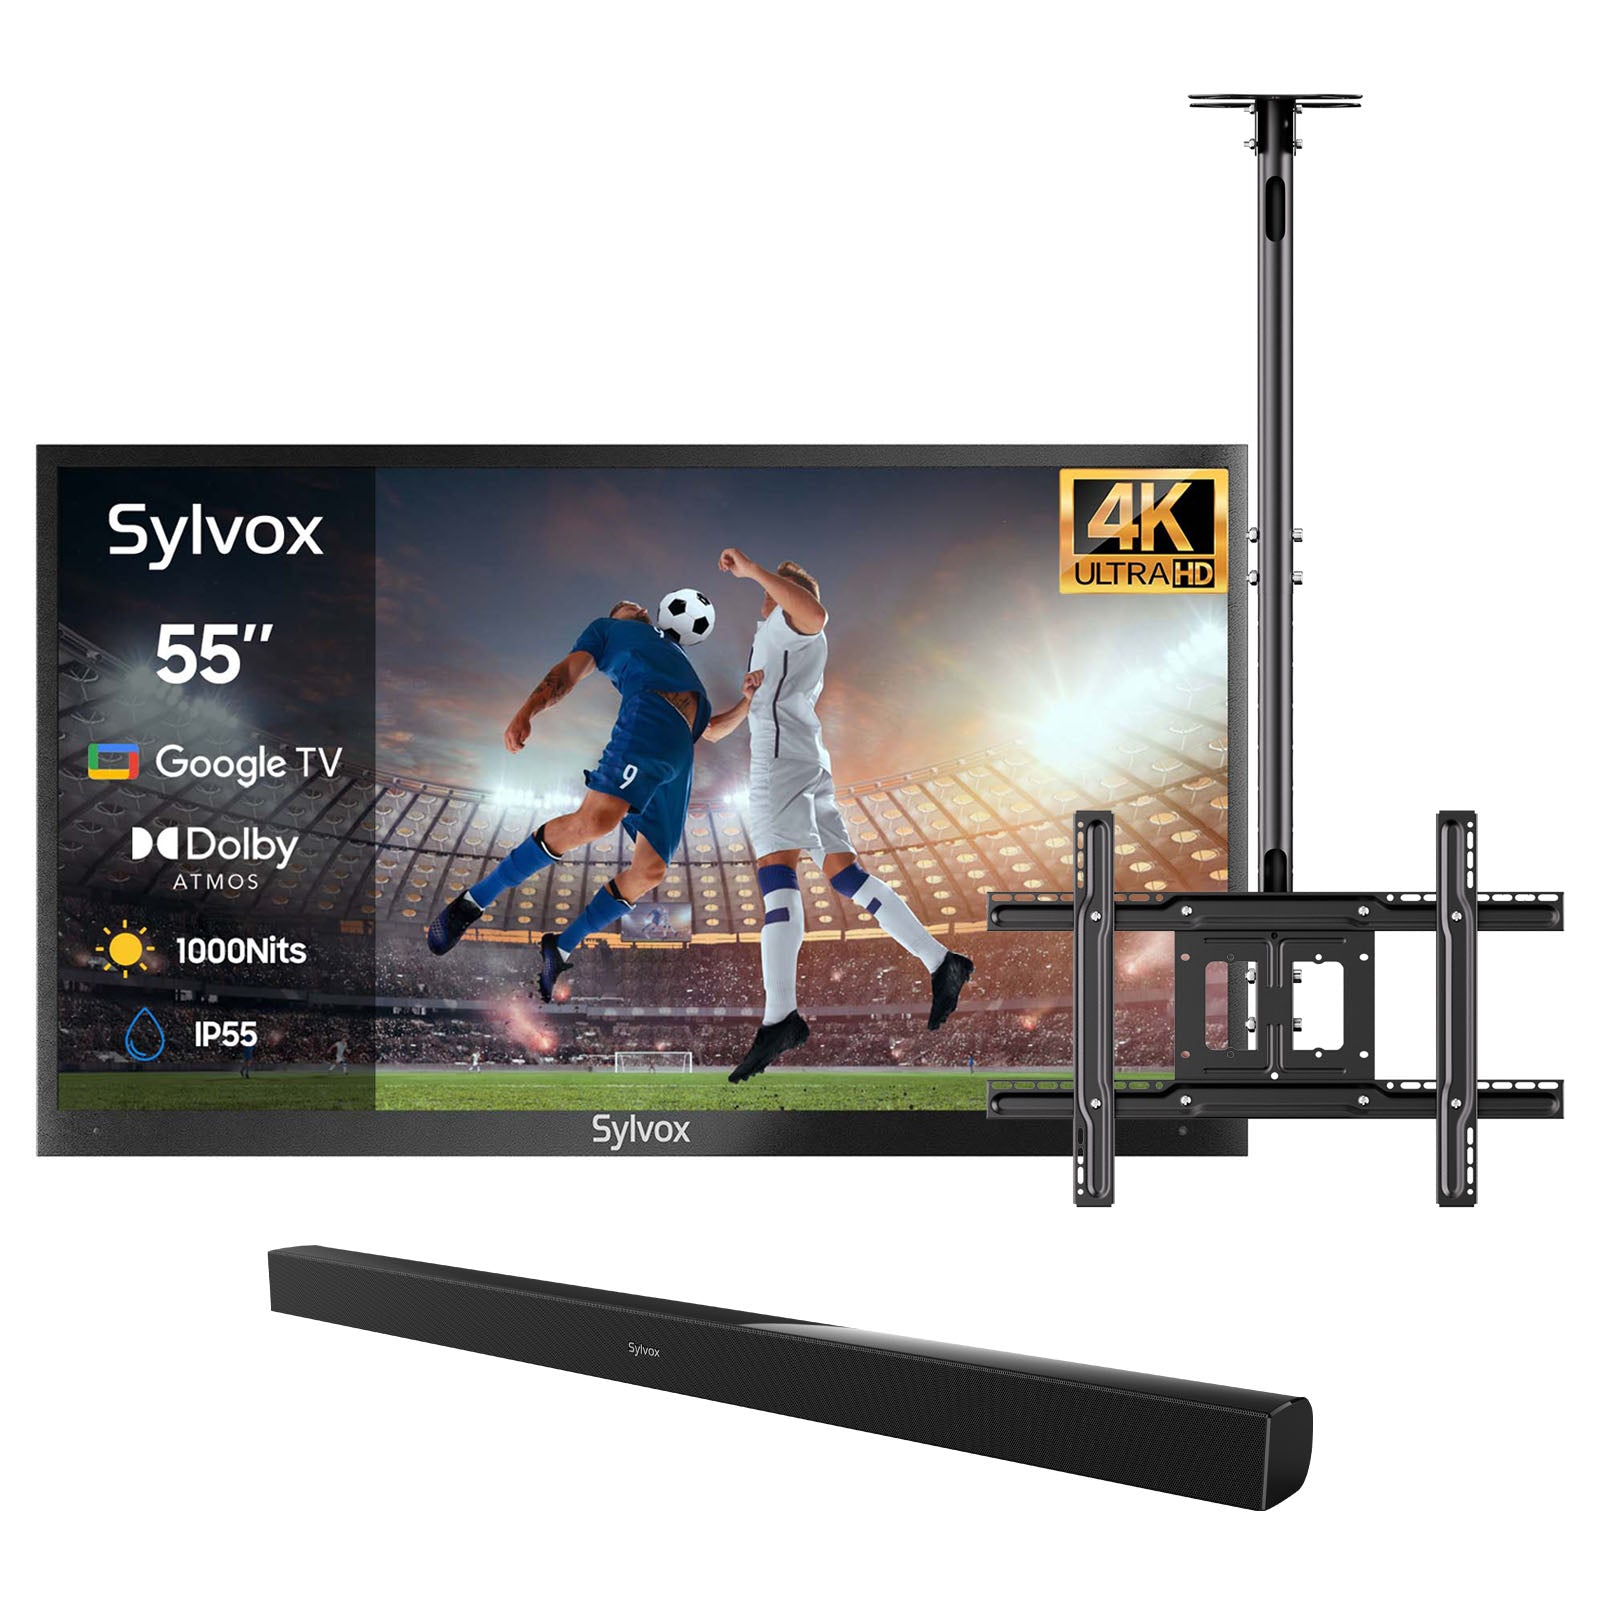 Outdoor TV UK with Google TV and 1000 Nits—2024 Deck Pro 2.0 Series